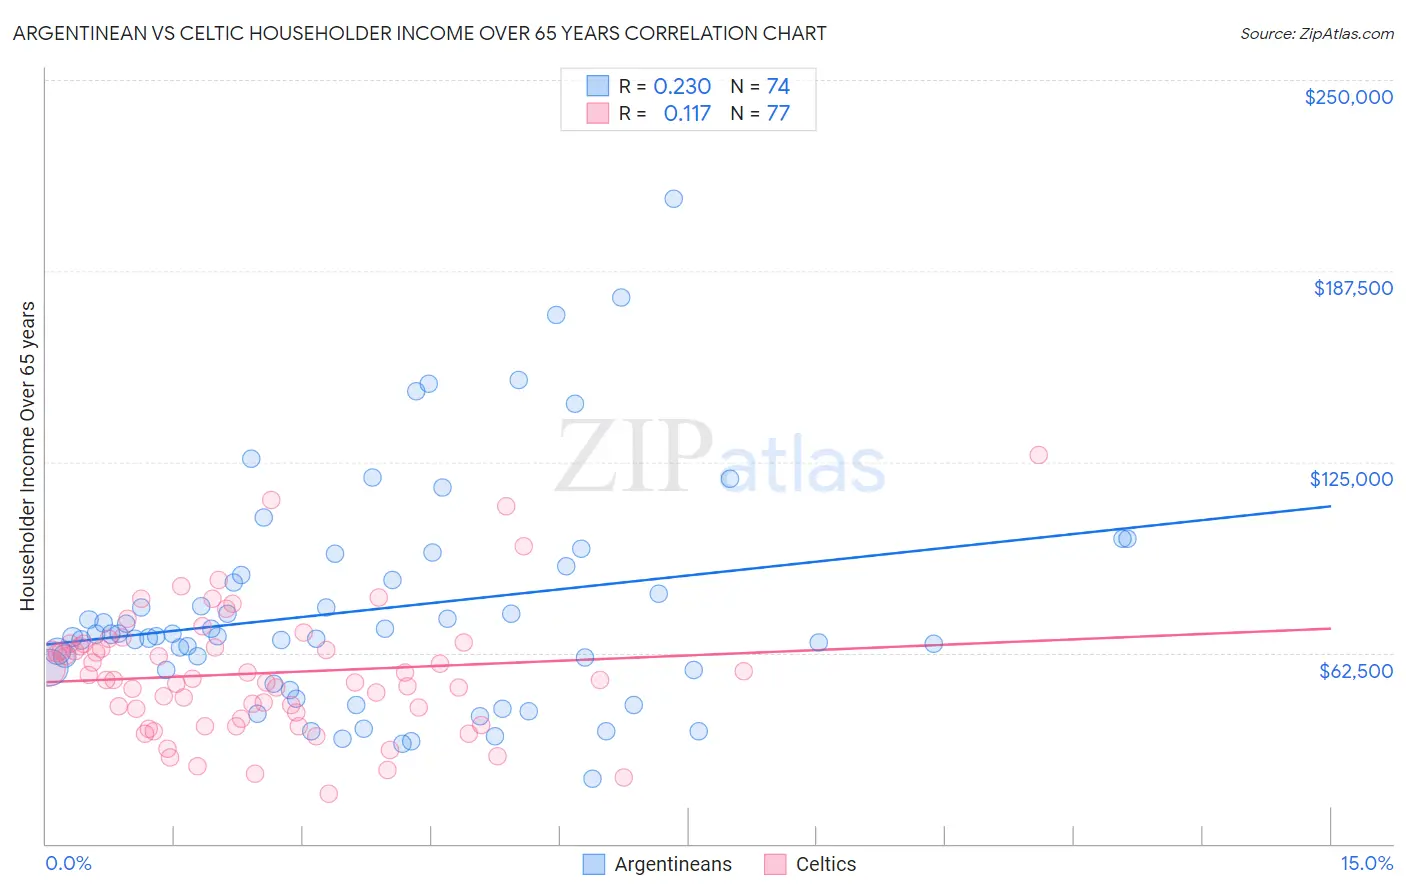 Argentinean vs Celtic Householder Income Over 65 years